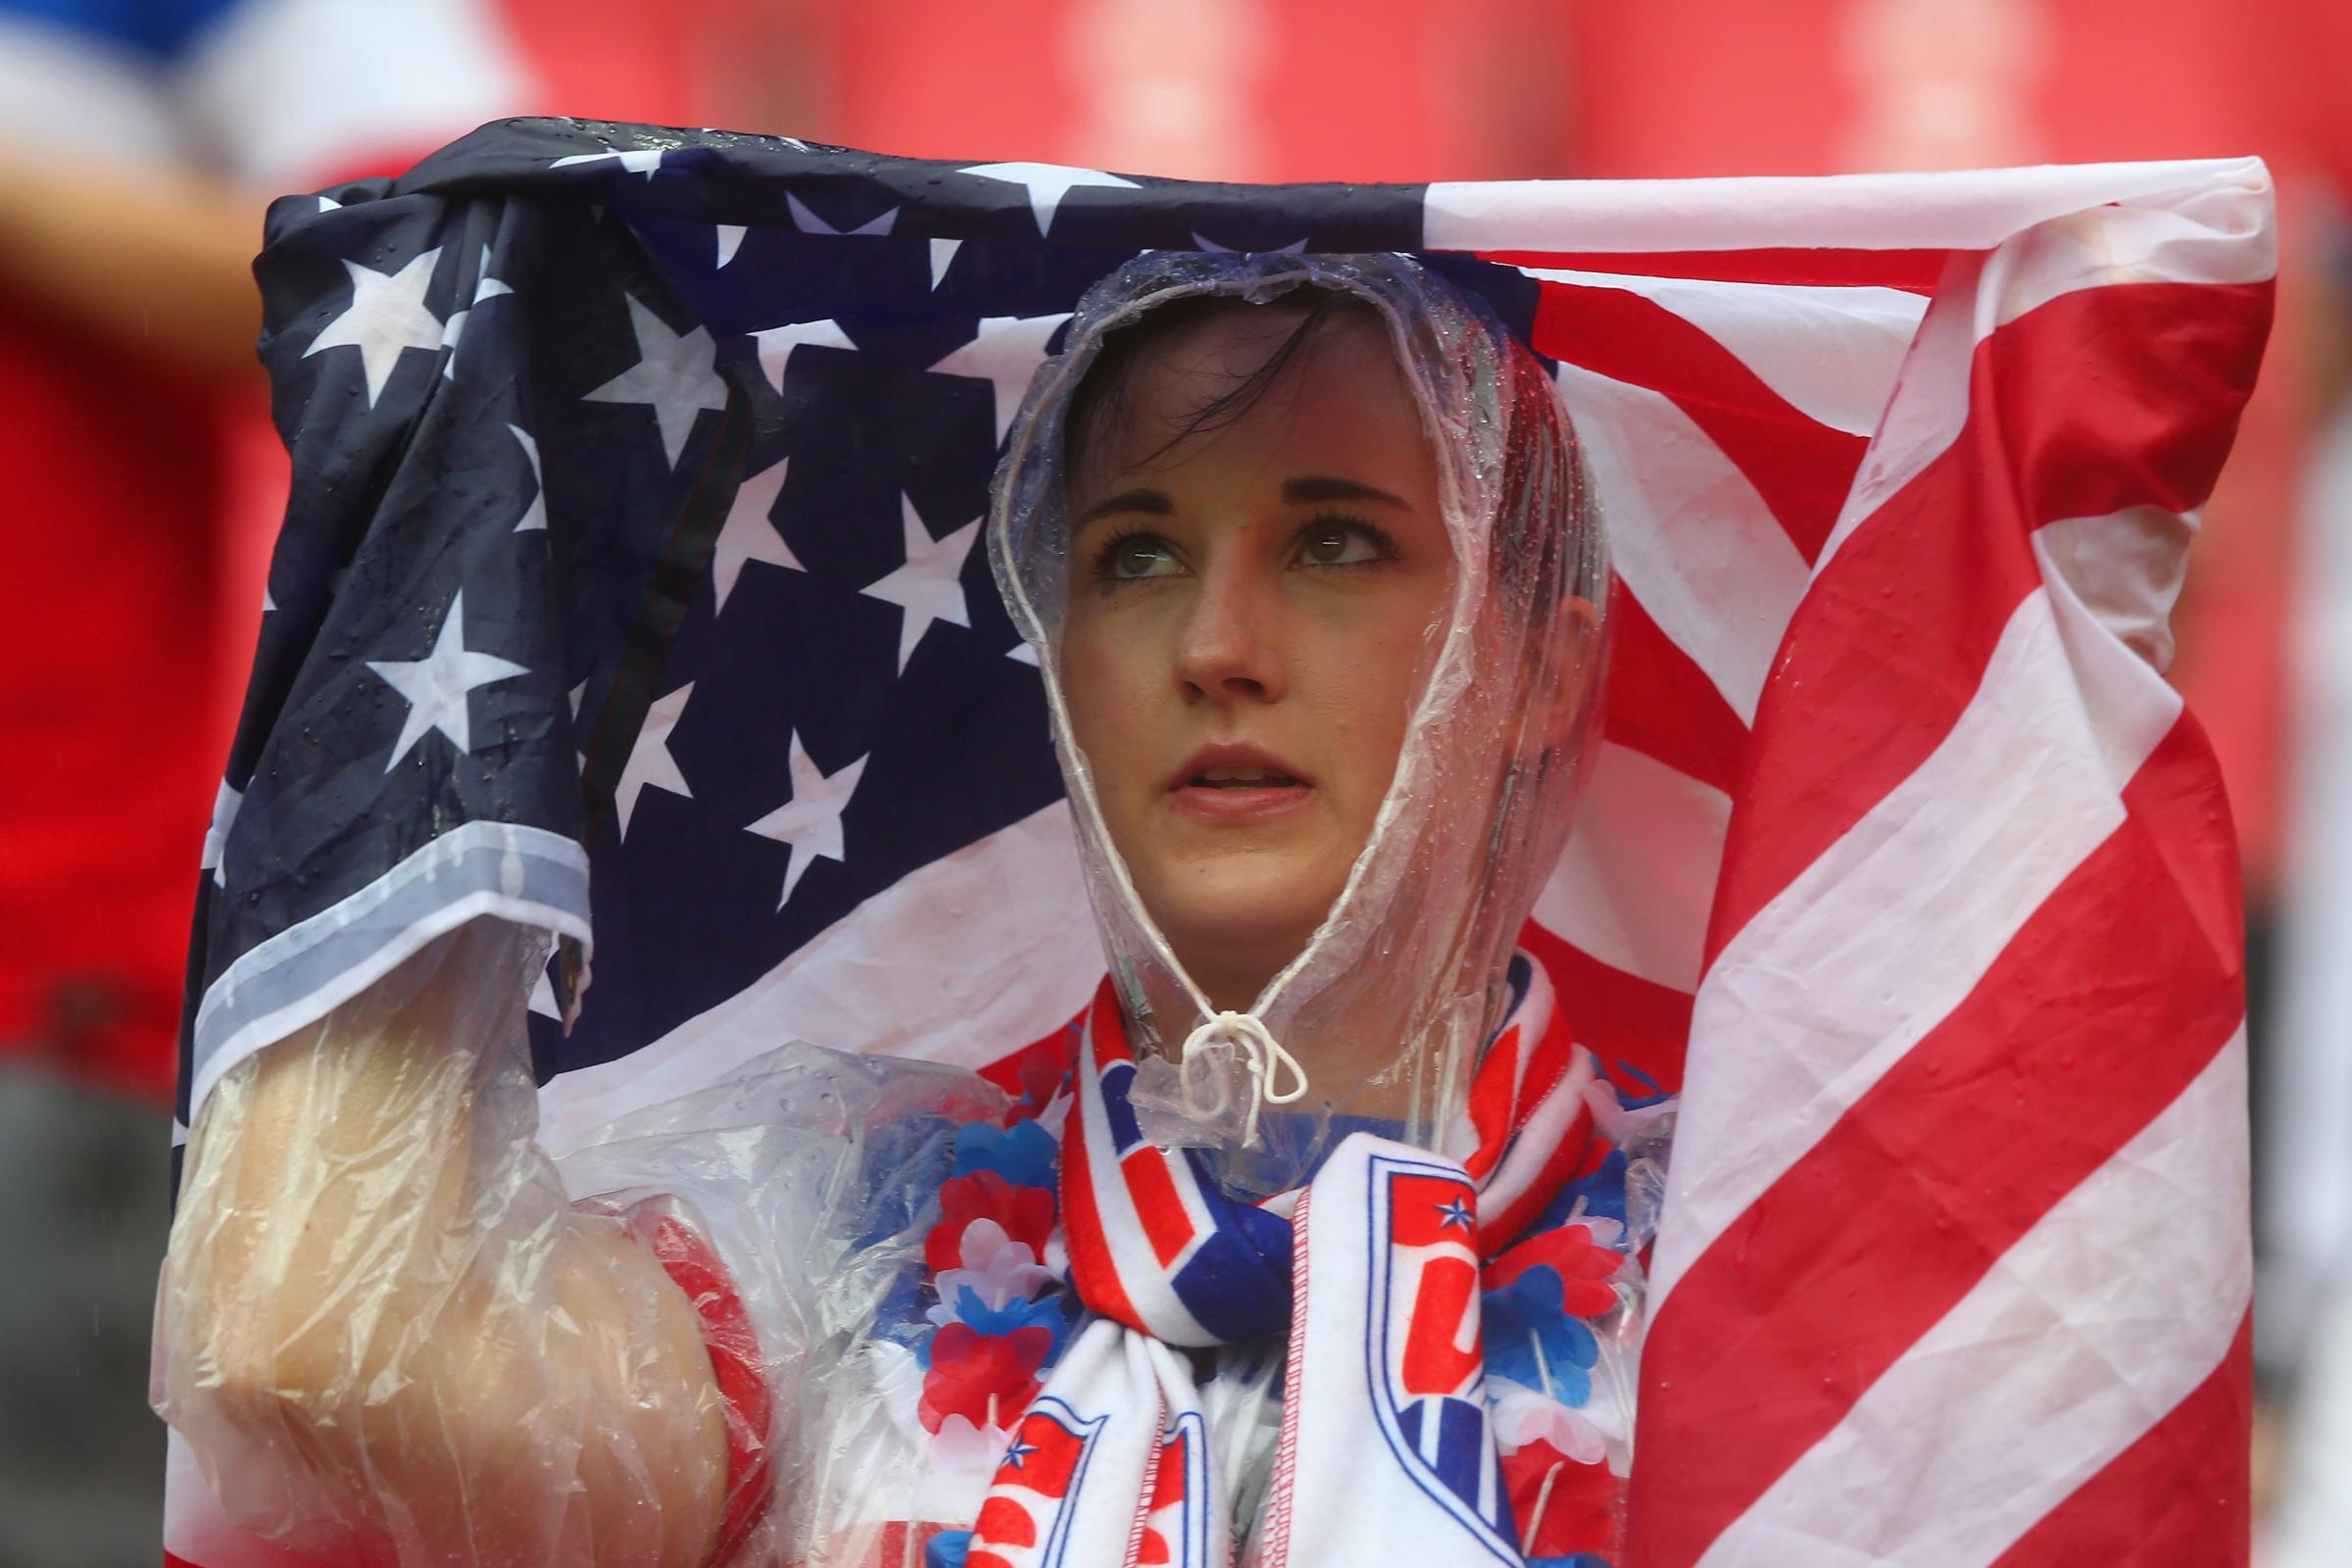 An United States fan looks on in the rain prior to the 2014 FIFA World Cup Brazil group G match between the United States and Germany at Arena Pernambuco on June 26, 2014 in Recife, Brazil.